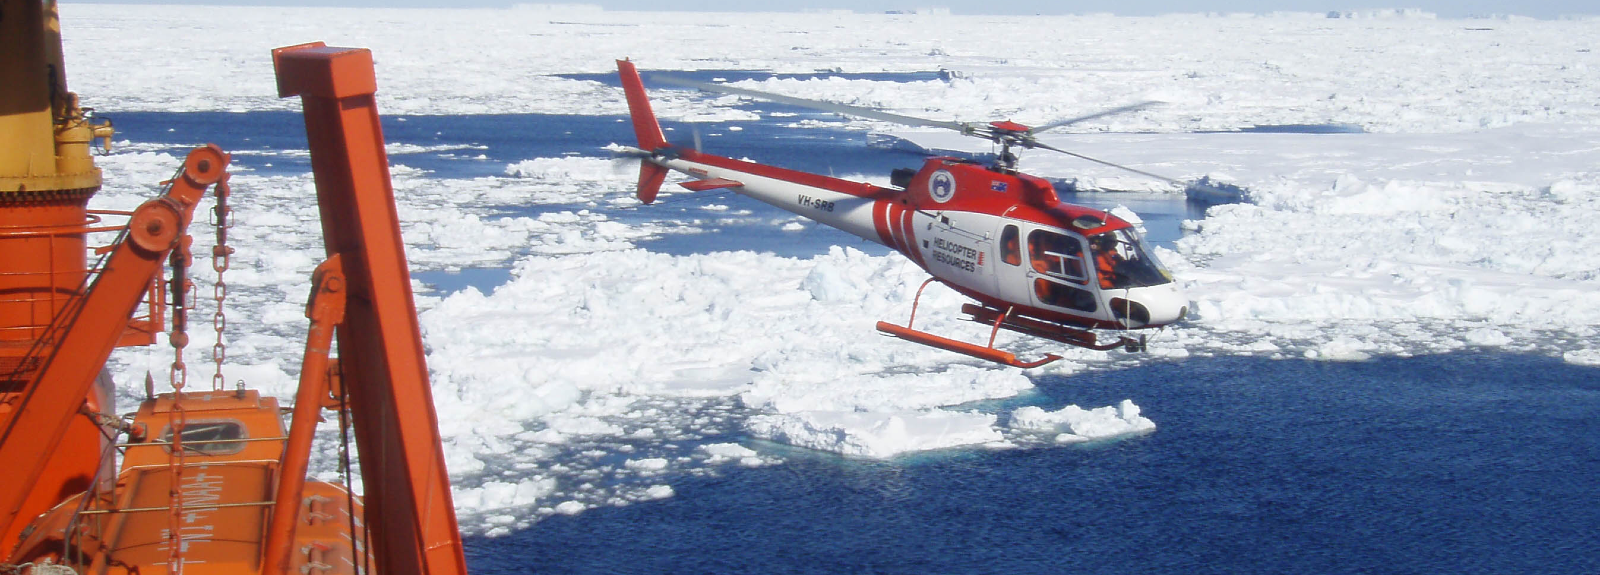 Healthcare in Remote and Extreme Environments